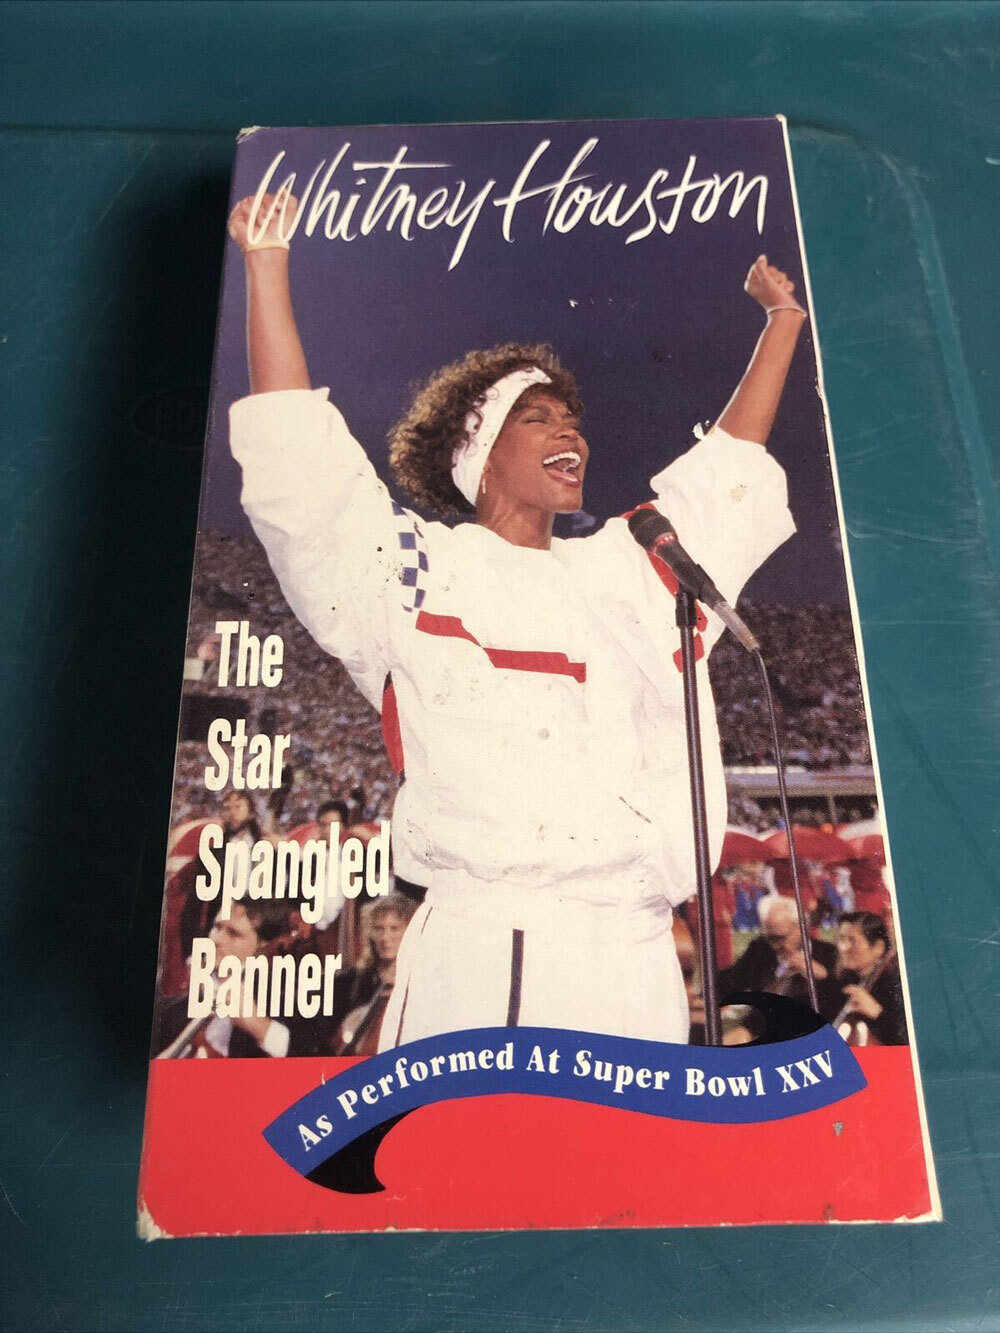 Whitney Houston, The Star Spangled Banner, and the Super Bowl